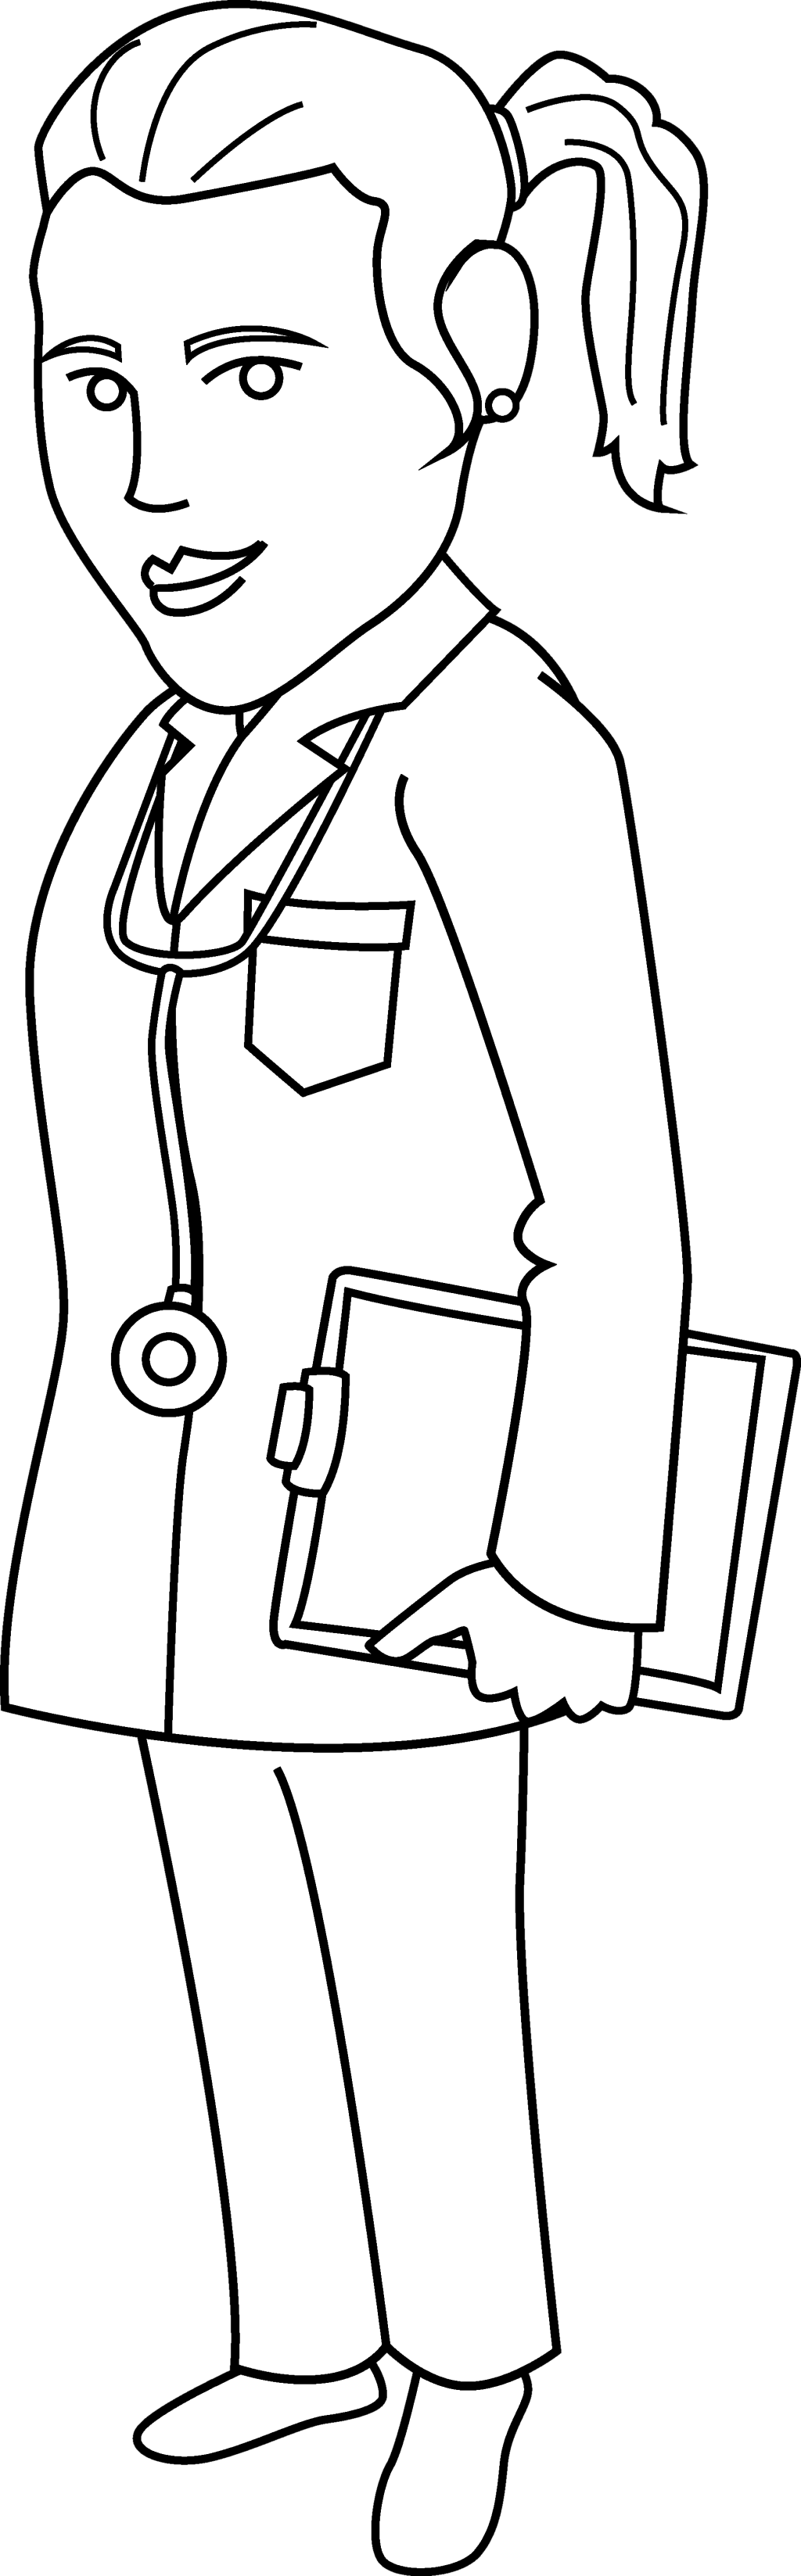 Coloring clipart doctor, Coloring doctor Transparent FREE